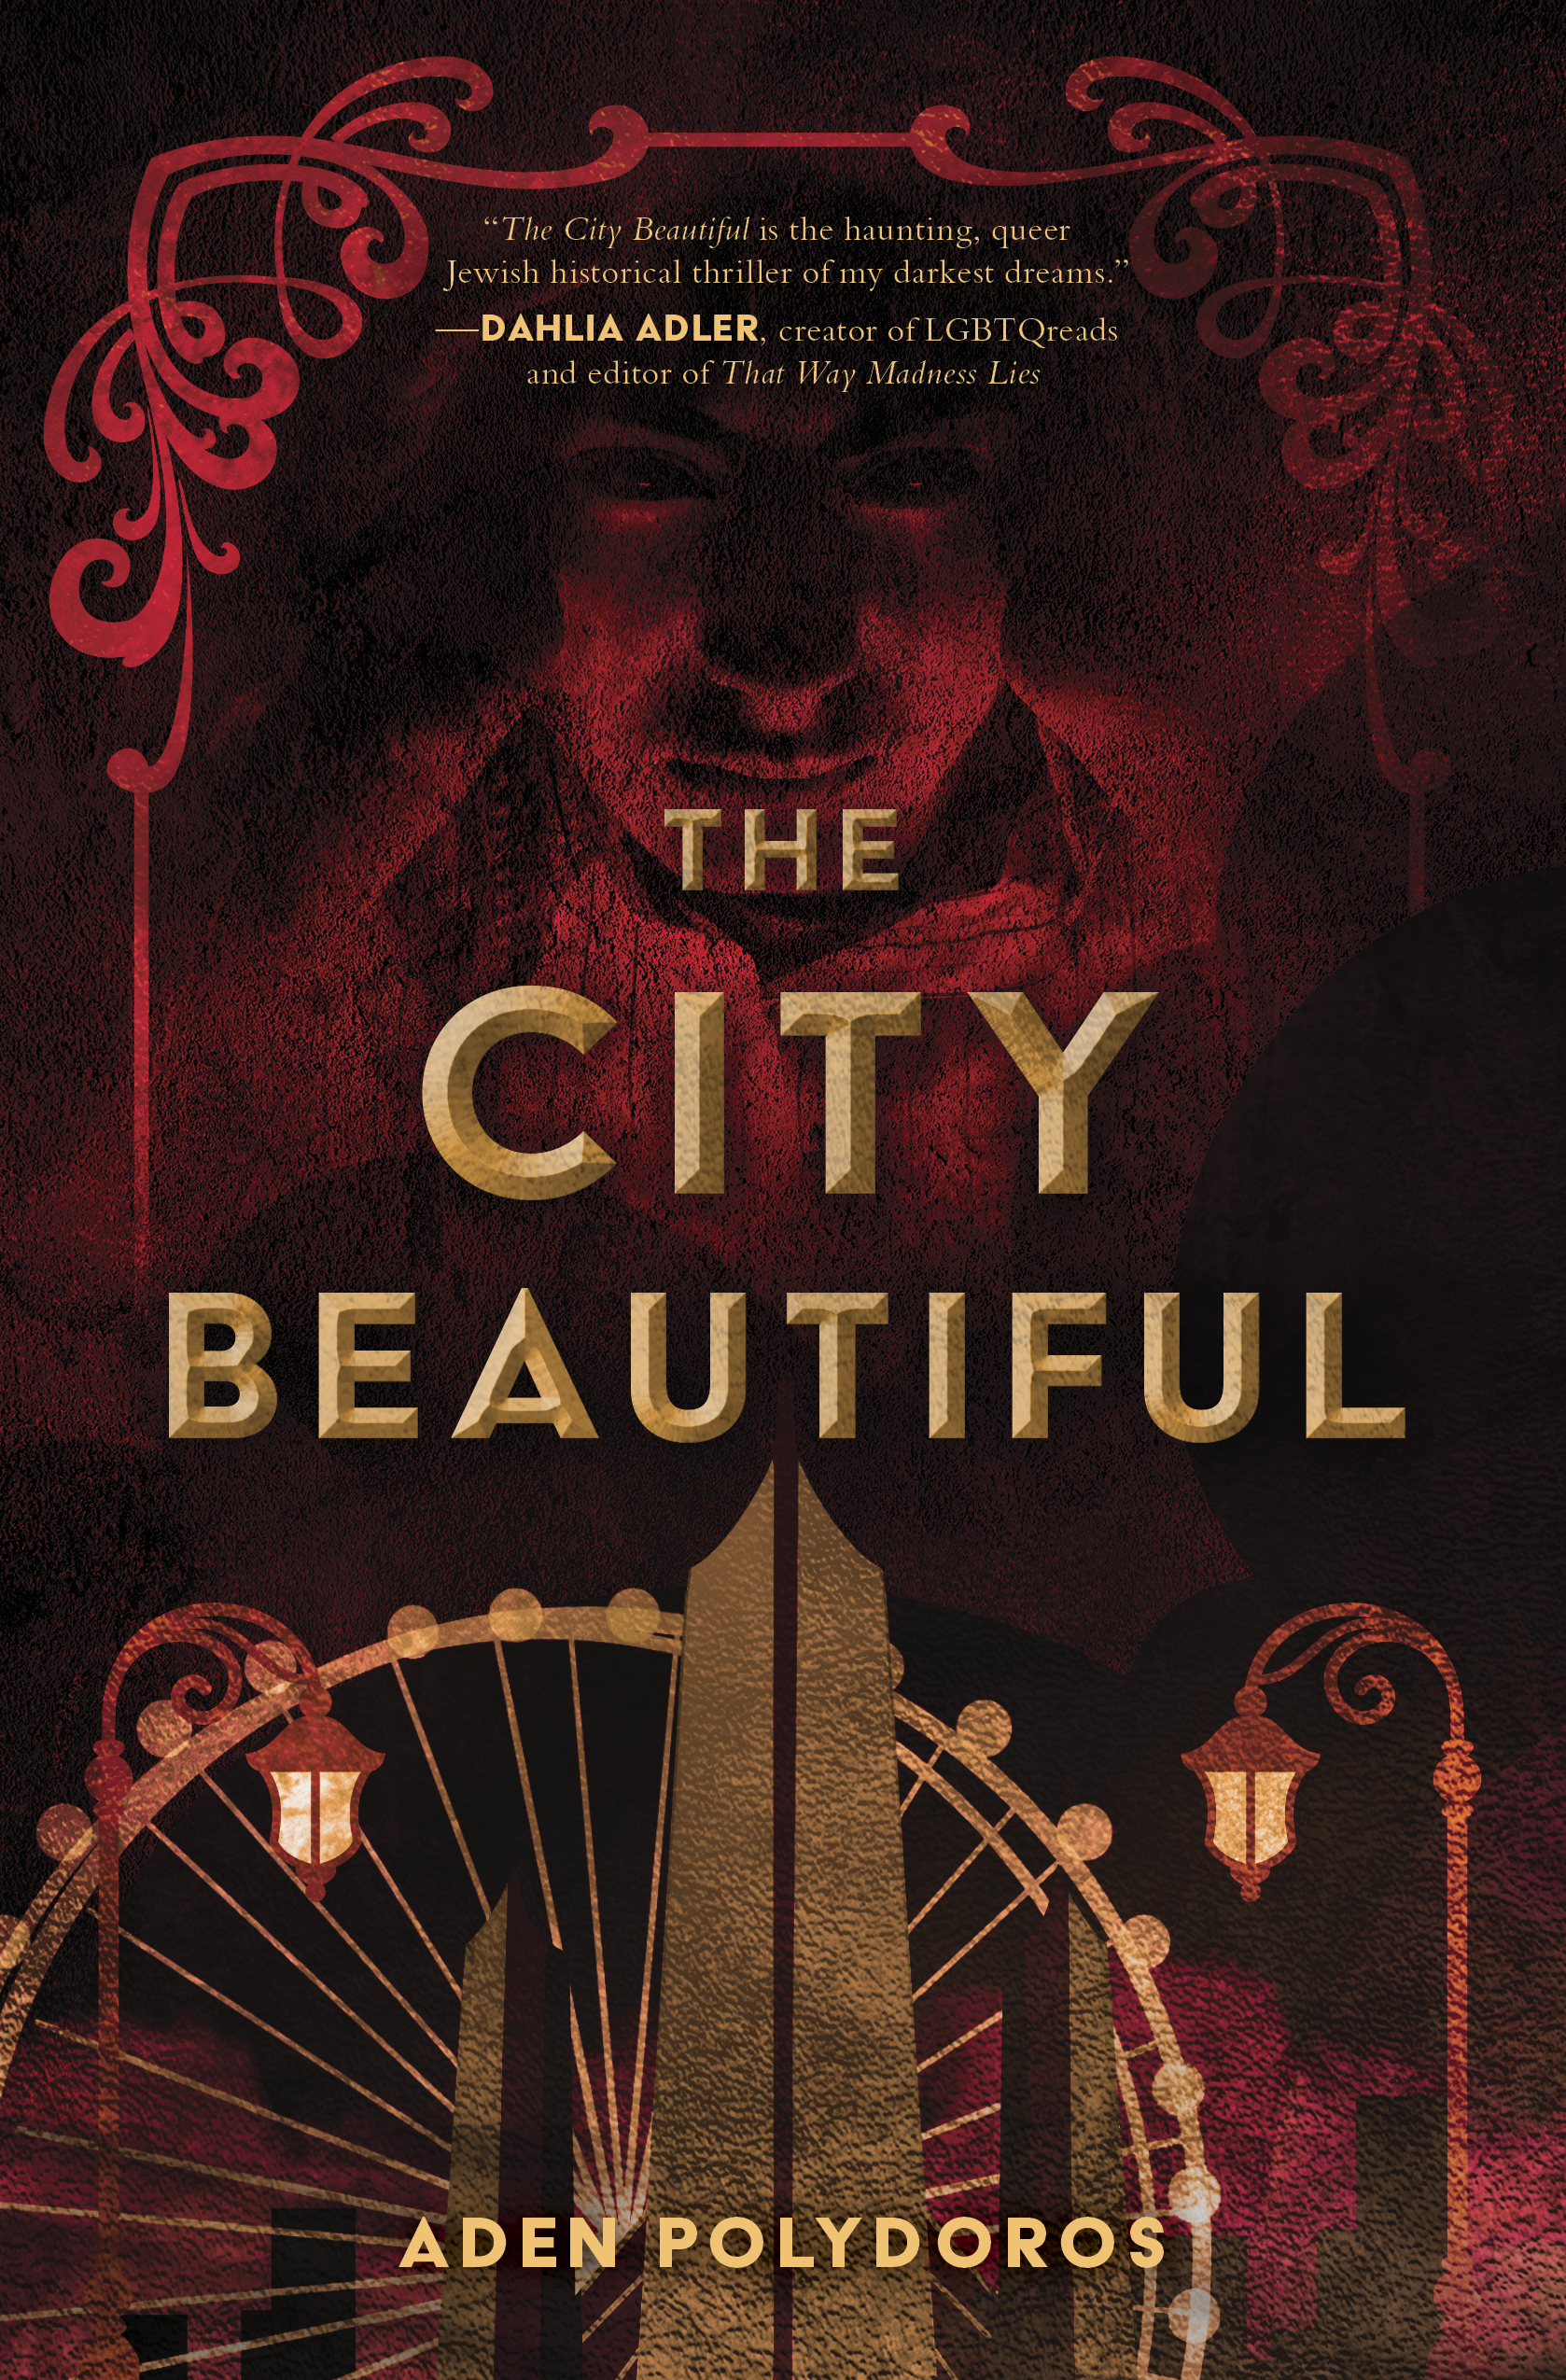 The City Beautiful cover